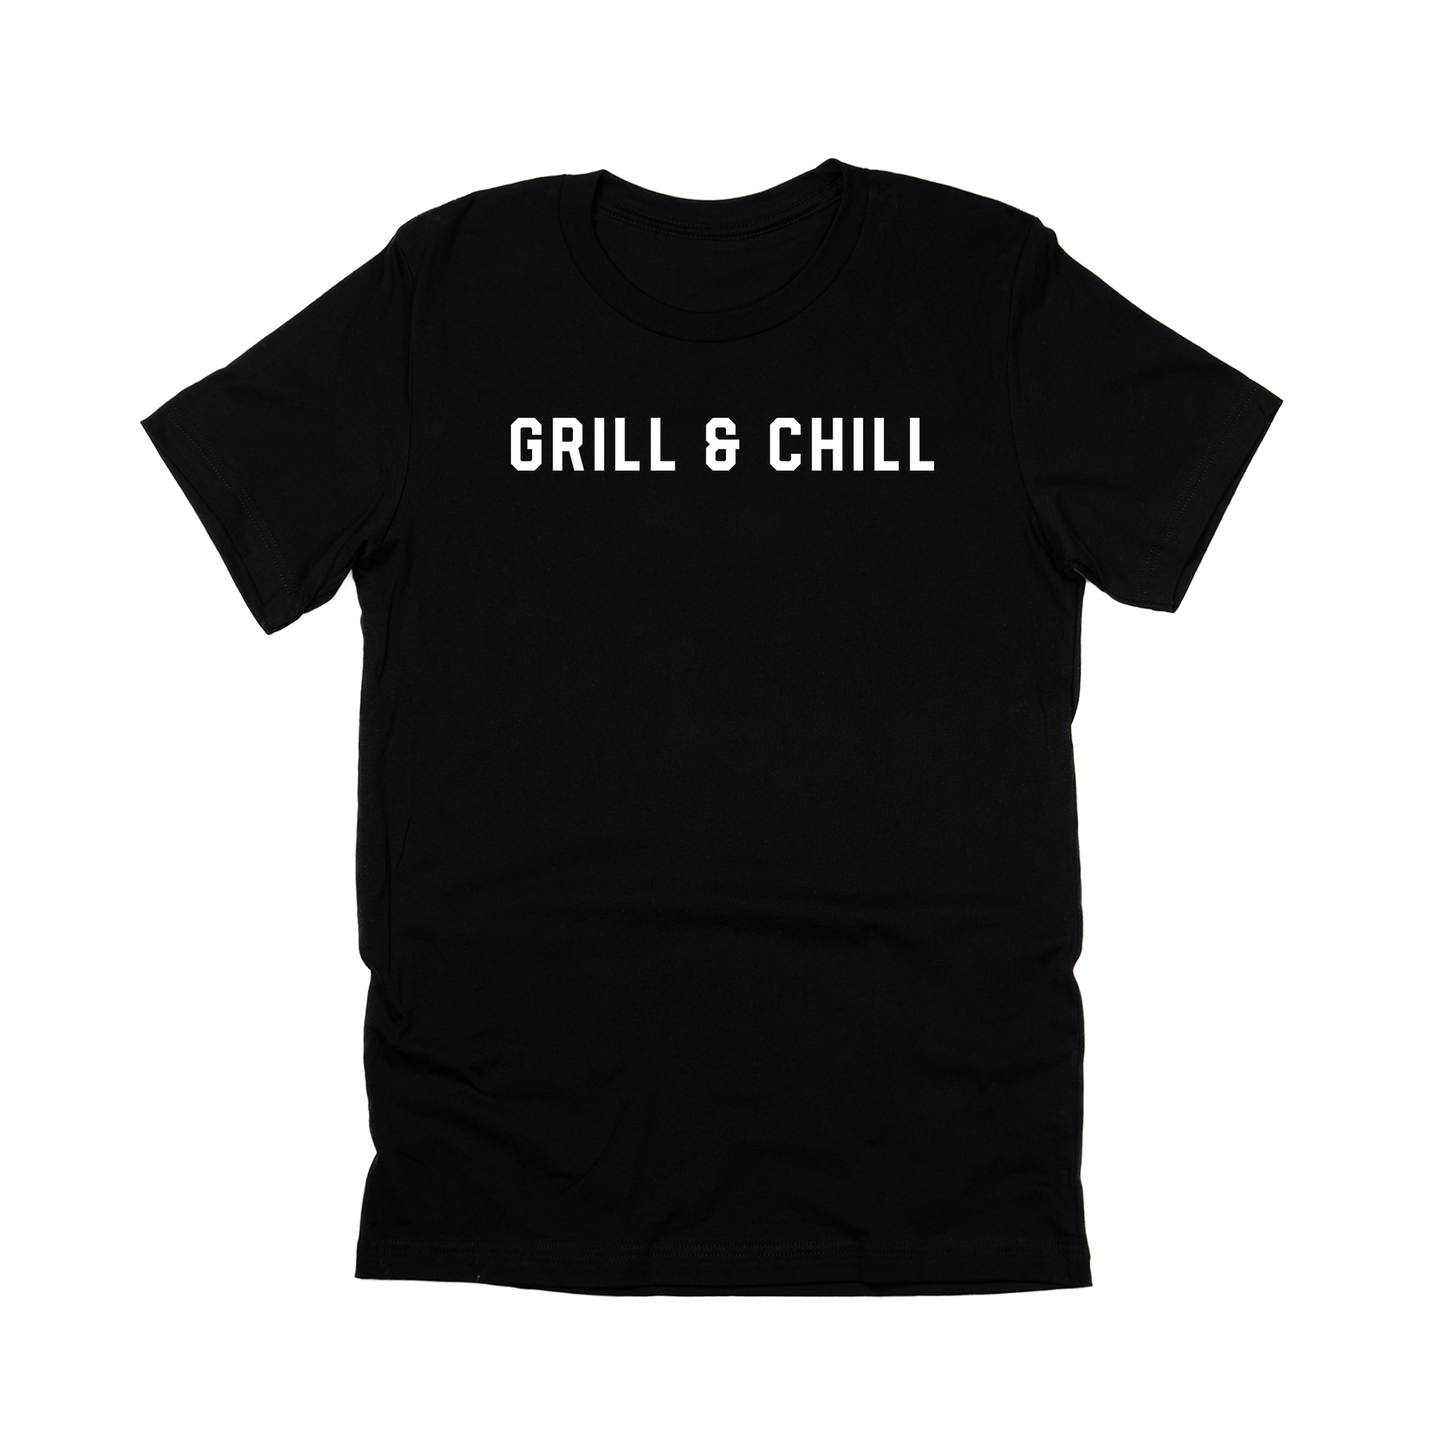 Grill & Chill (White) - Tee (Black)